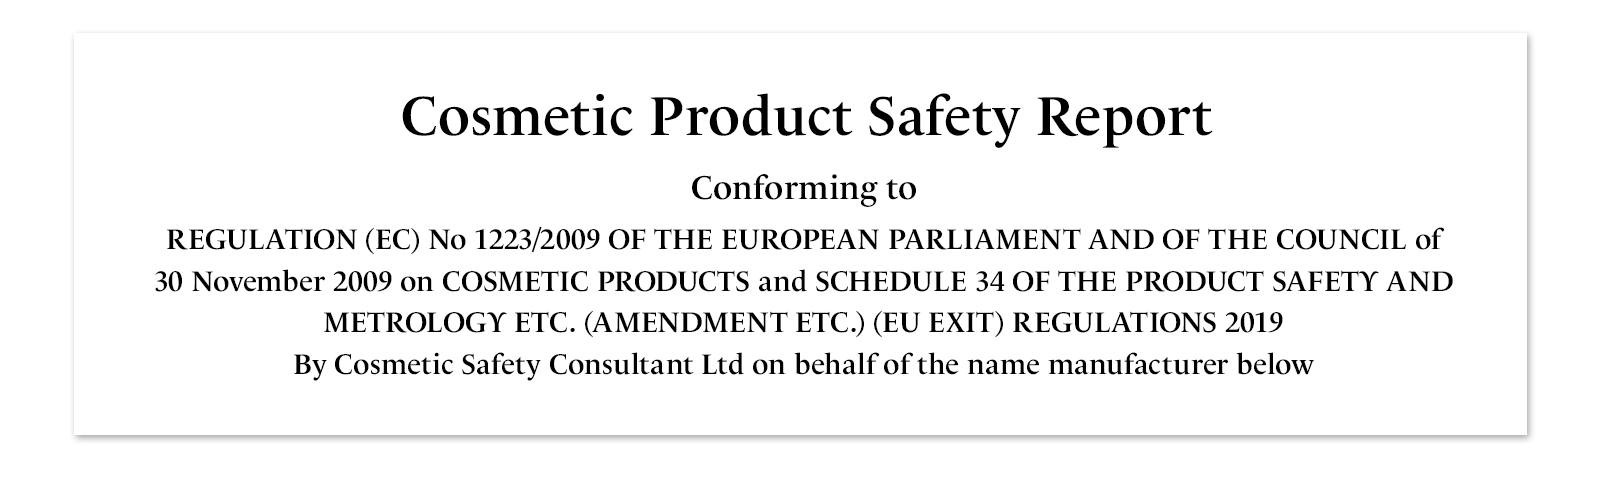 Header of cosmetic product safety report document